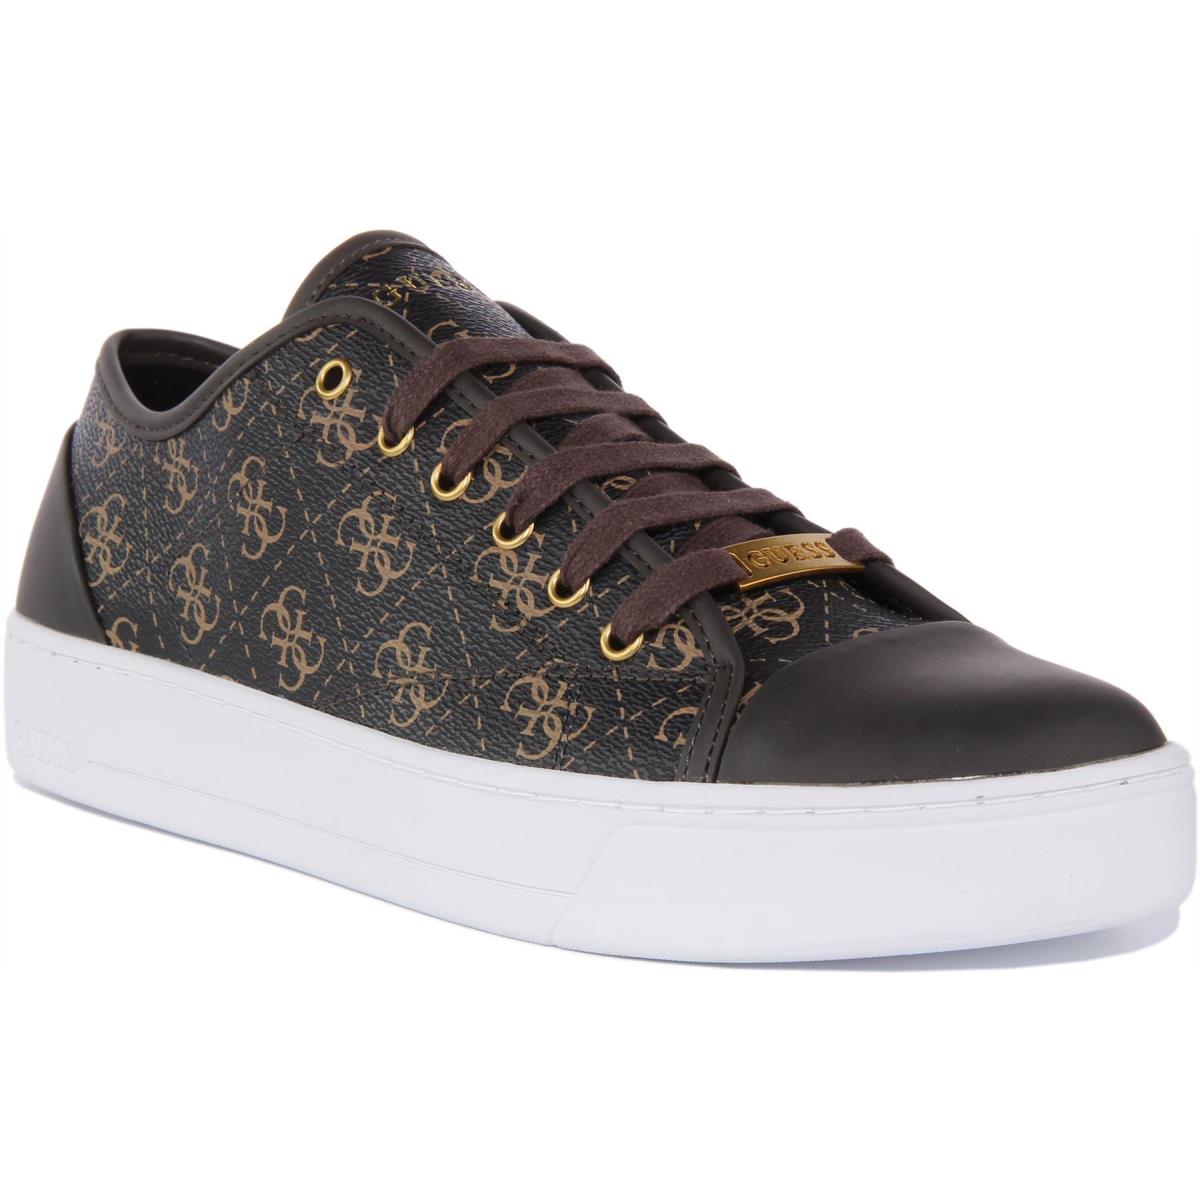 Guess Fm5Udifal12 Udine Mens Low Top Sneaker In Choco Brown Size US 7 - 12 CHOCO BROWN